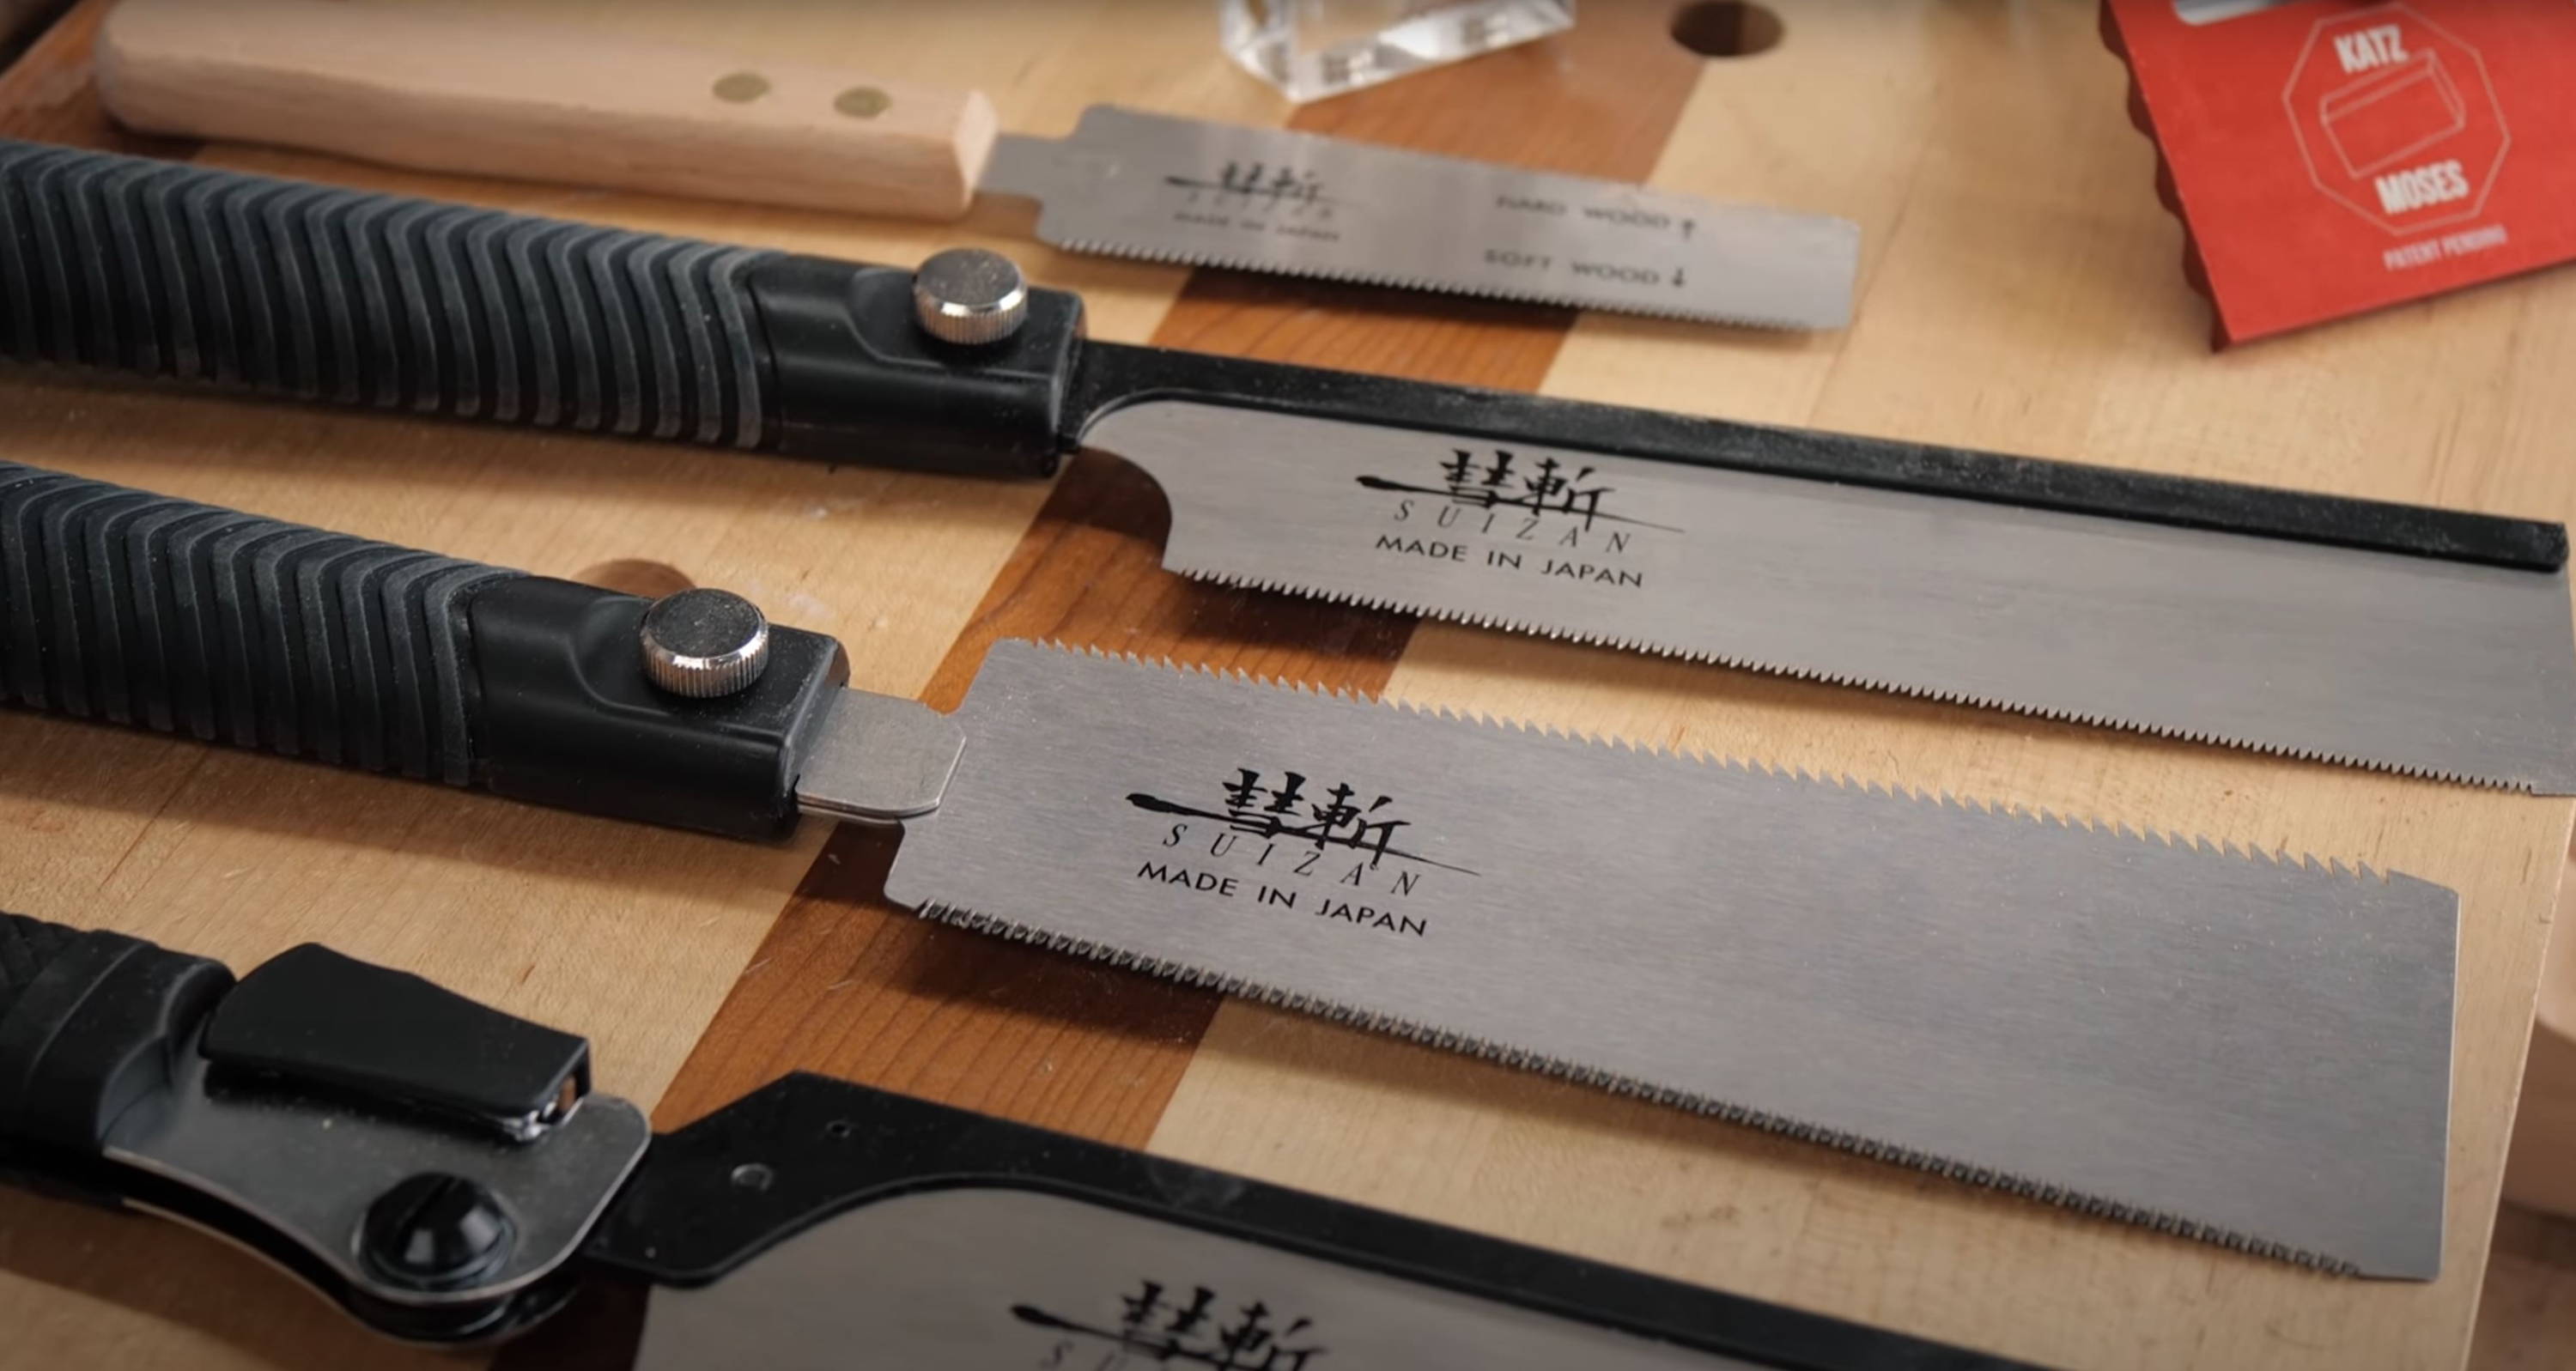 Choosing and Using Japanese Handsaws - FineWoodworking